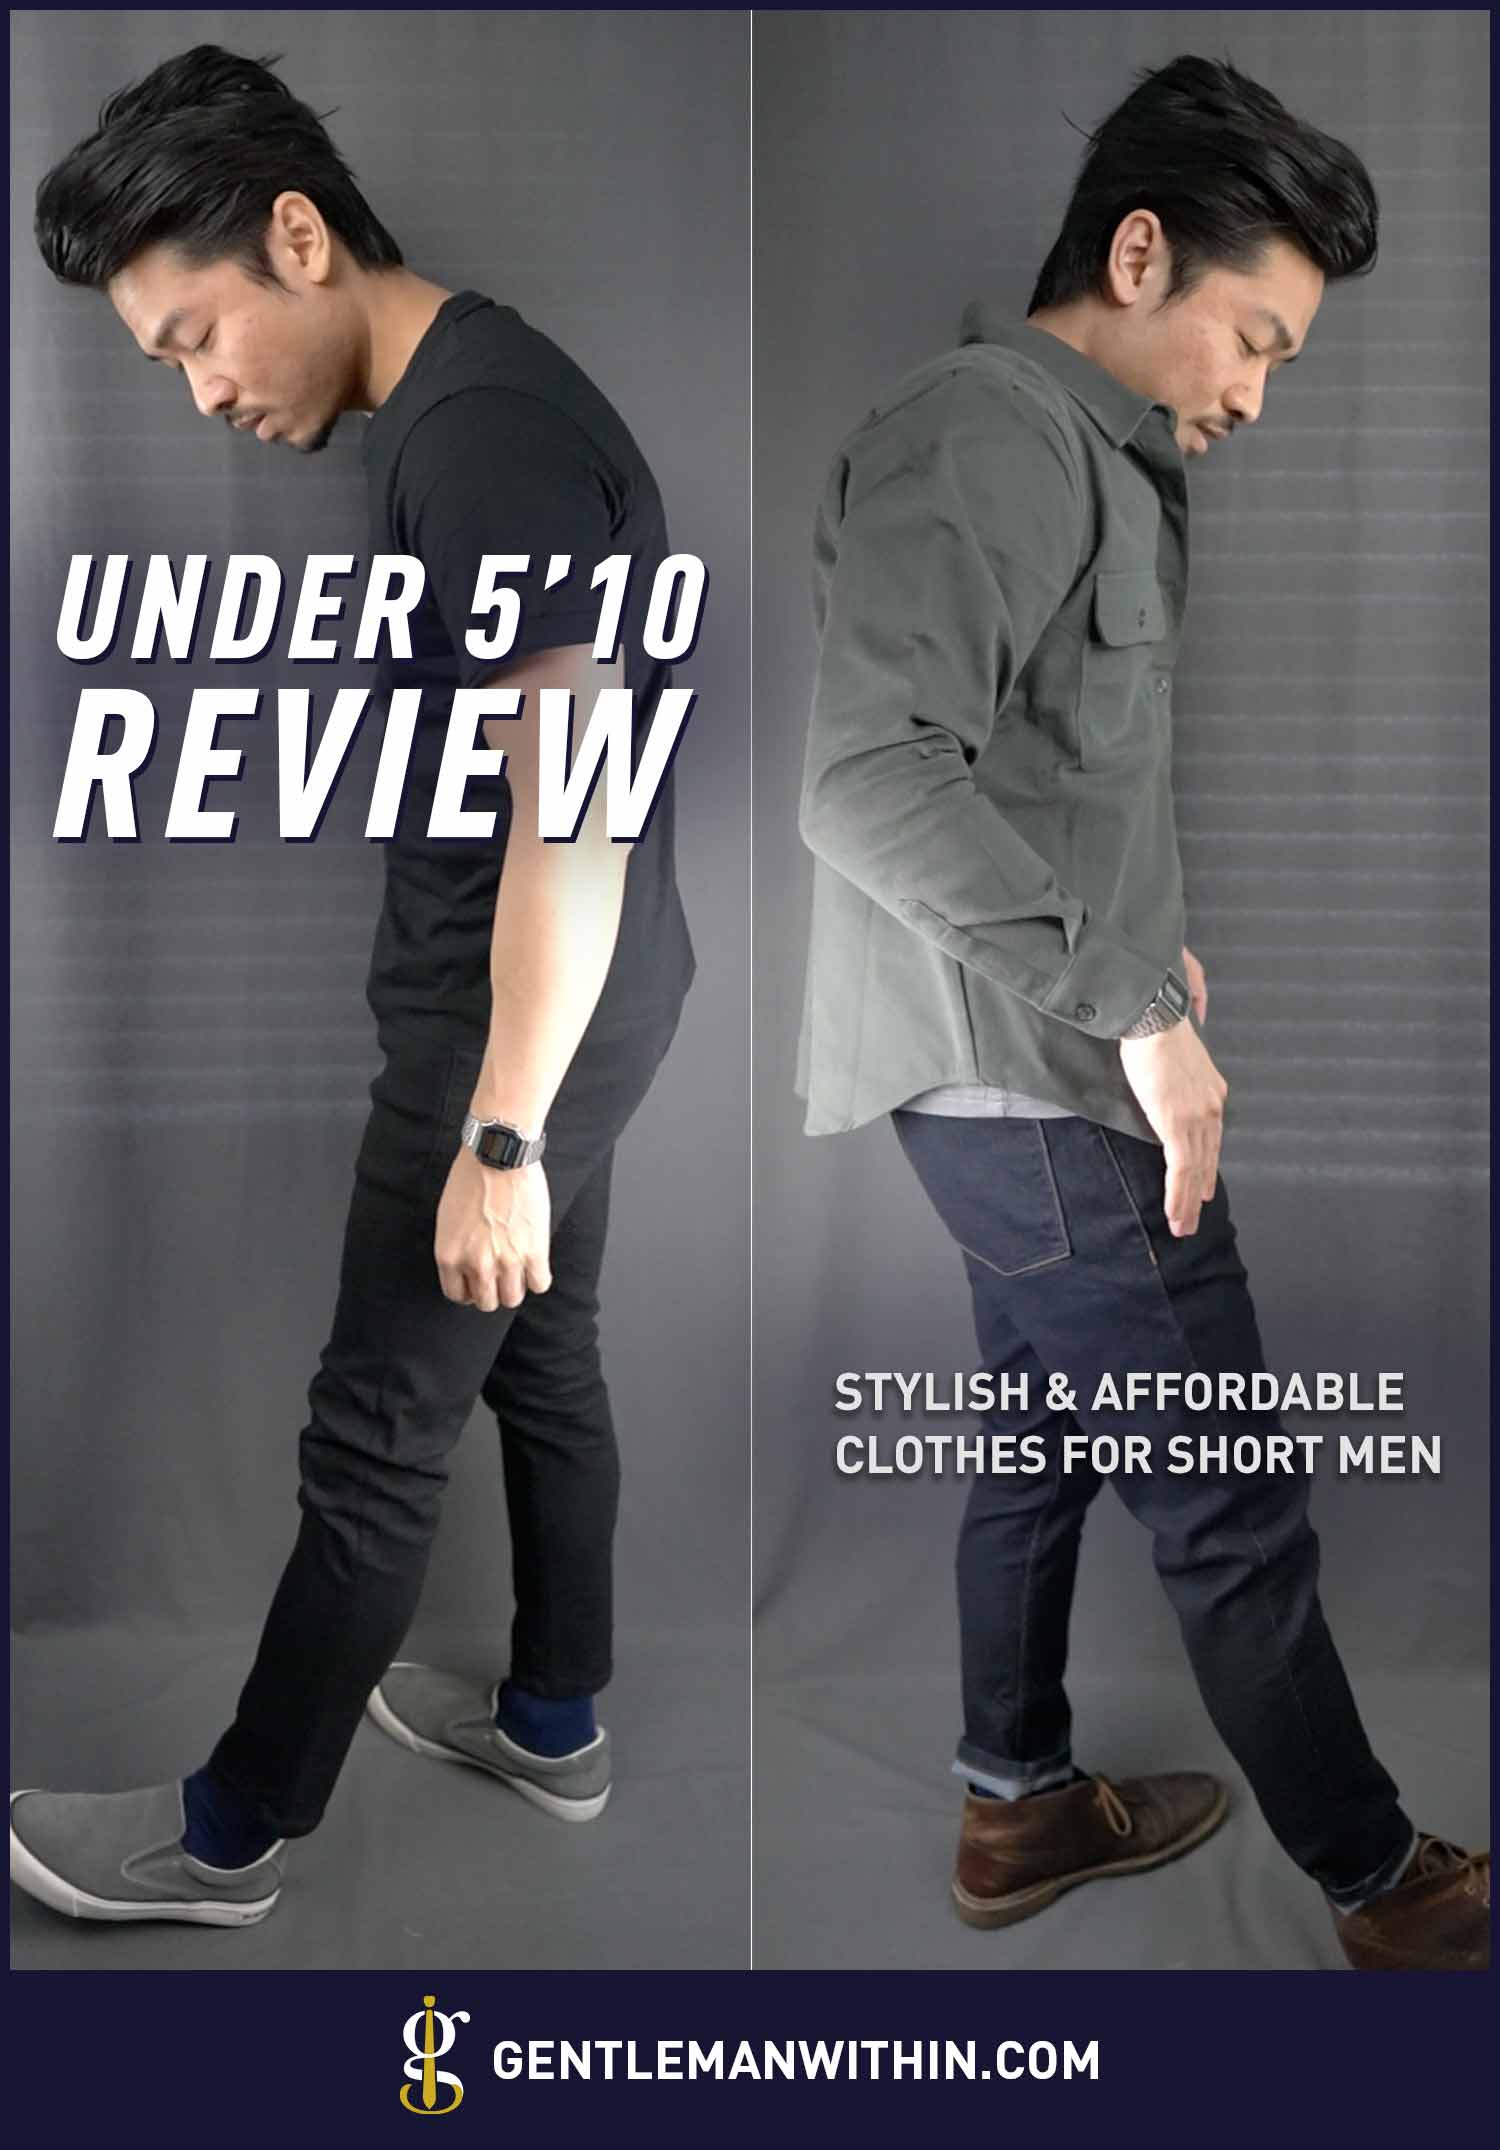 Under 5'10 Review: Stylish & Affordable Clothes for Short Men | GENTLEMAN WITHIN